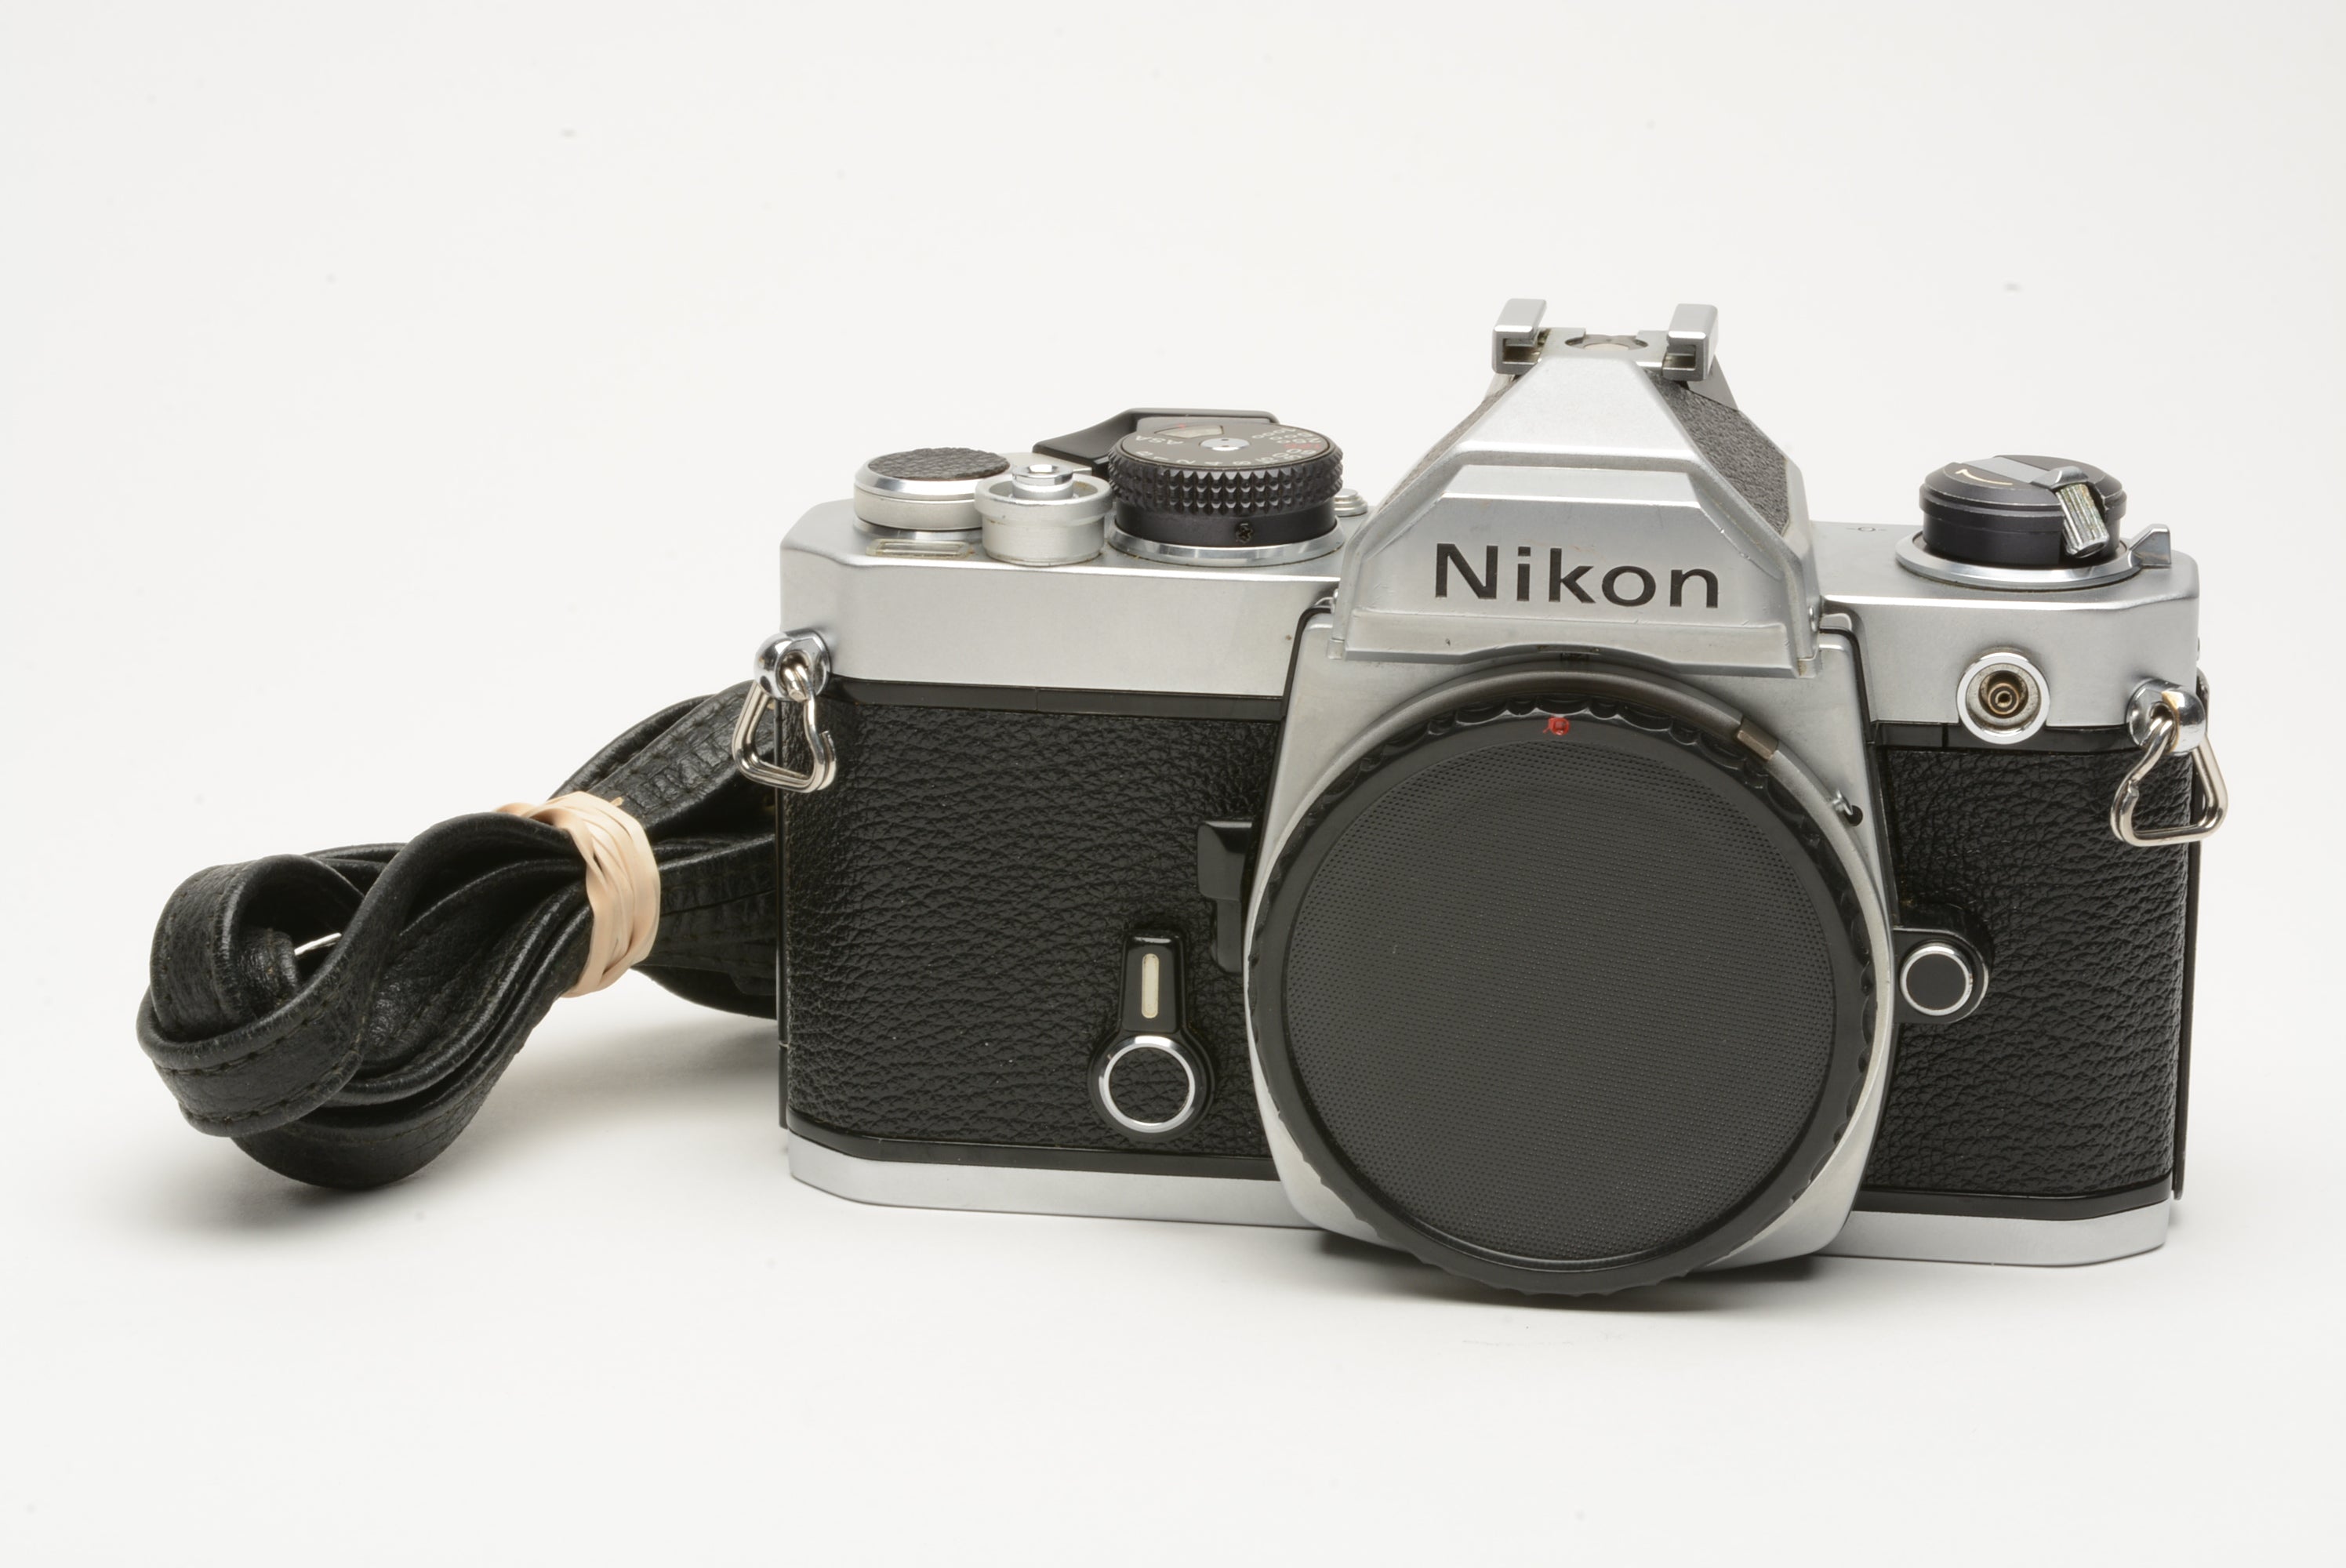 Nikon FM Chrome 35mm SLR Body, good seals, tested, great condition